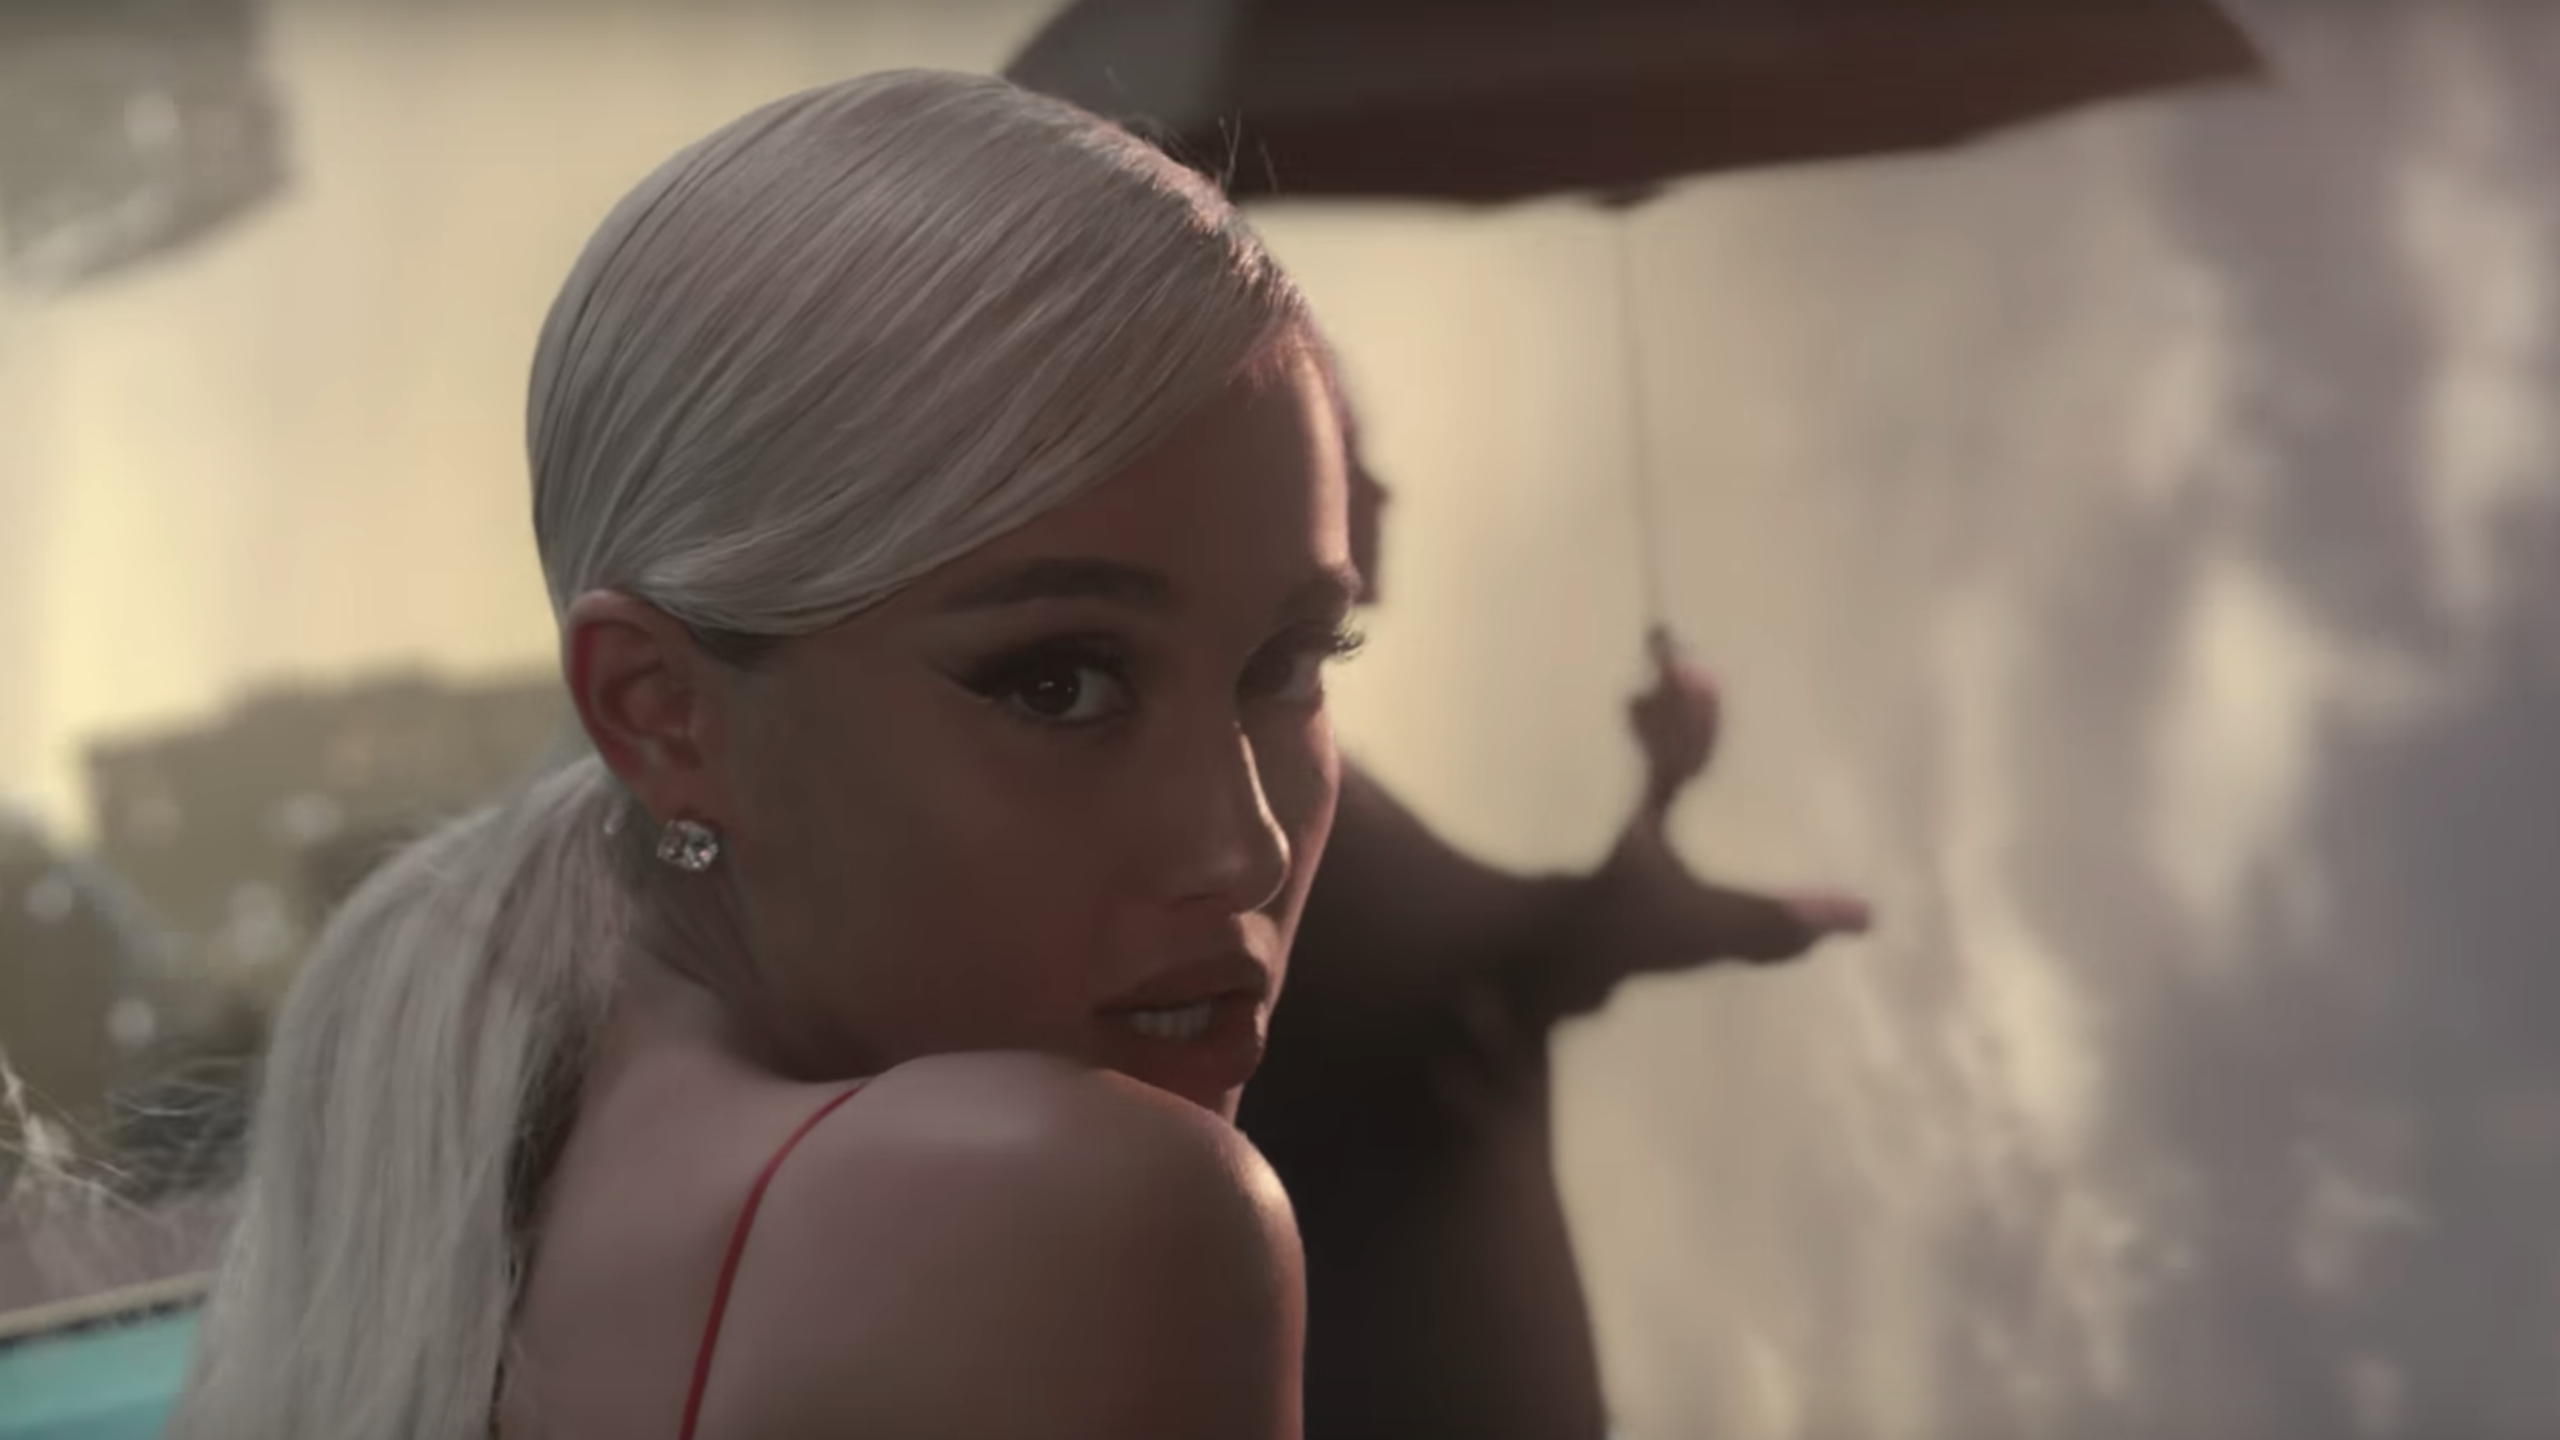 Every Single Outfit From Ariana Grande's “No Tears Left to Cry